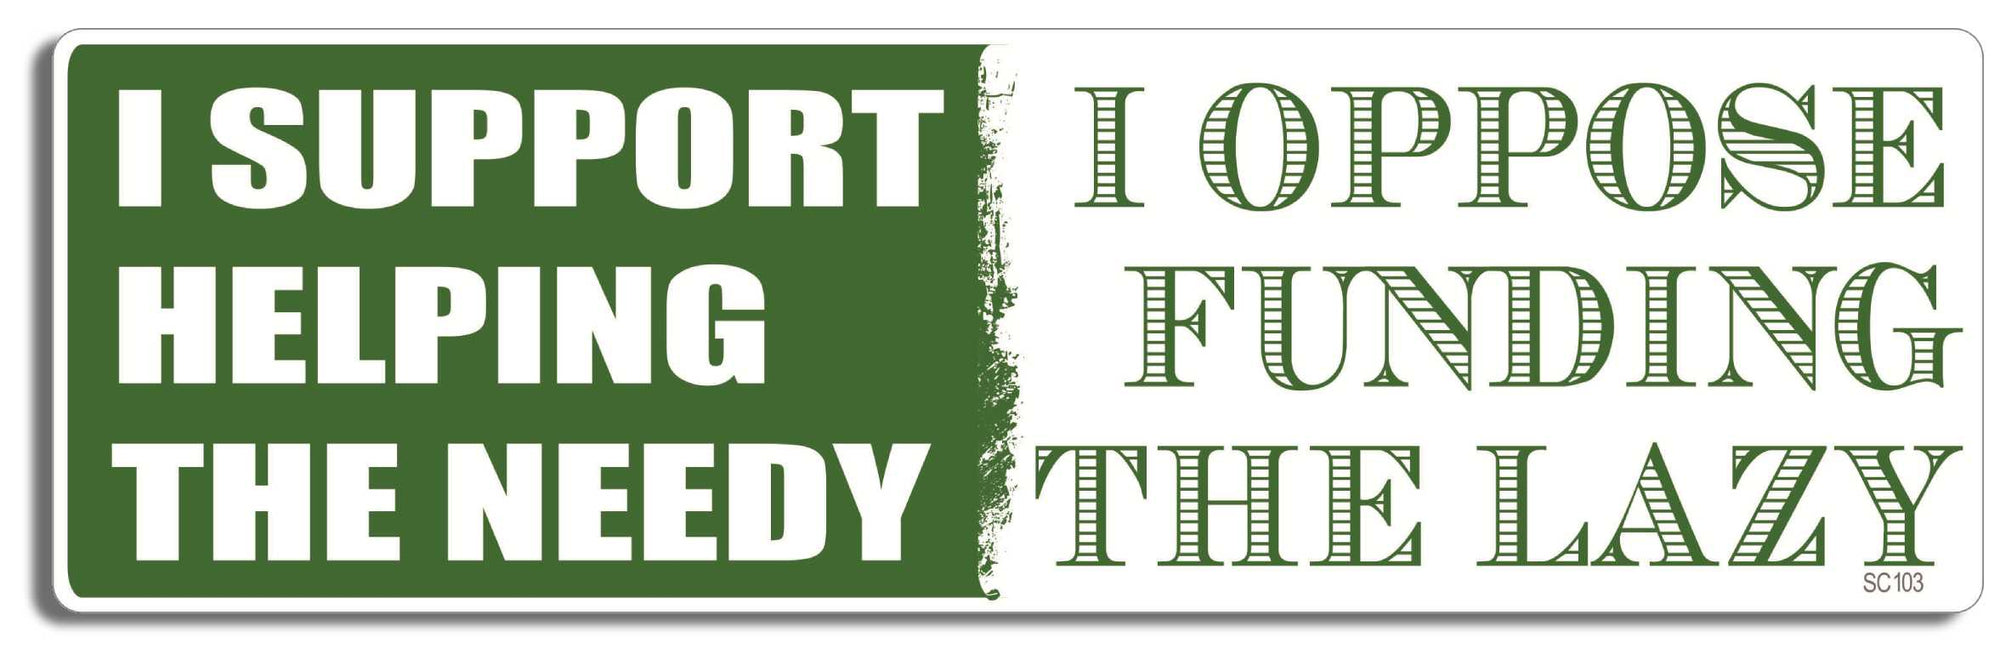 I support helping the needy. I oppose funding the lazy - 3" x 10" Bumper Sticker--Car Magnet- -  Decal Bumper Sticker-political Bumper Sticker Car Magnet I support helping the needy. I oppose-  Decal for carsconservative, republican